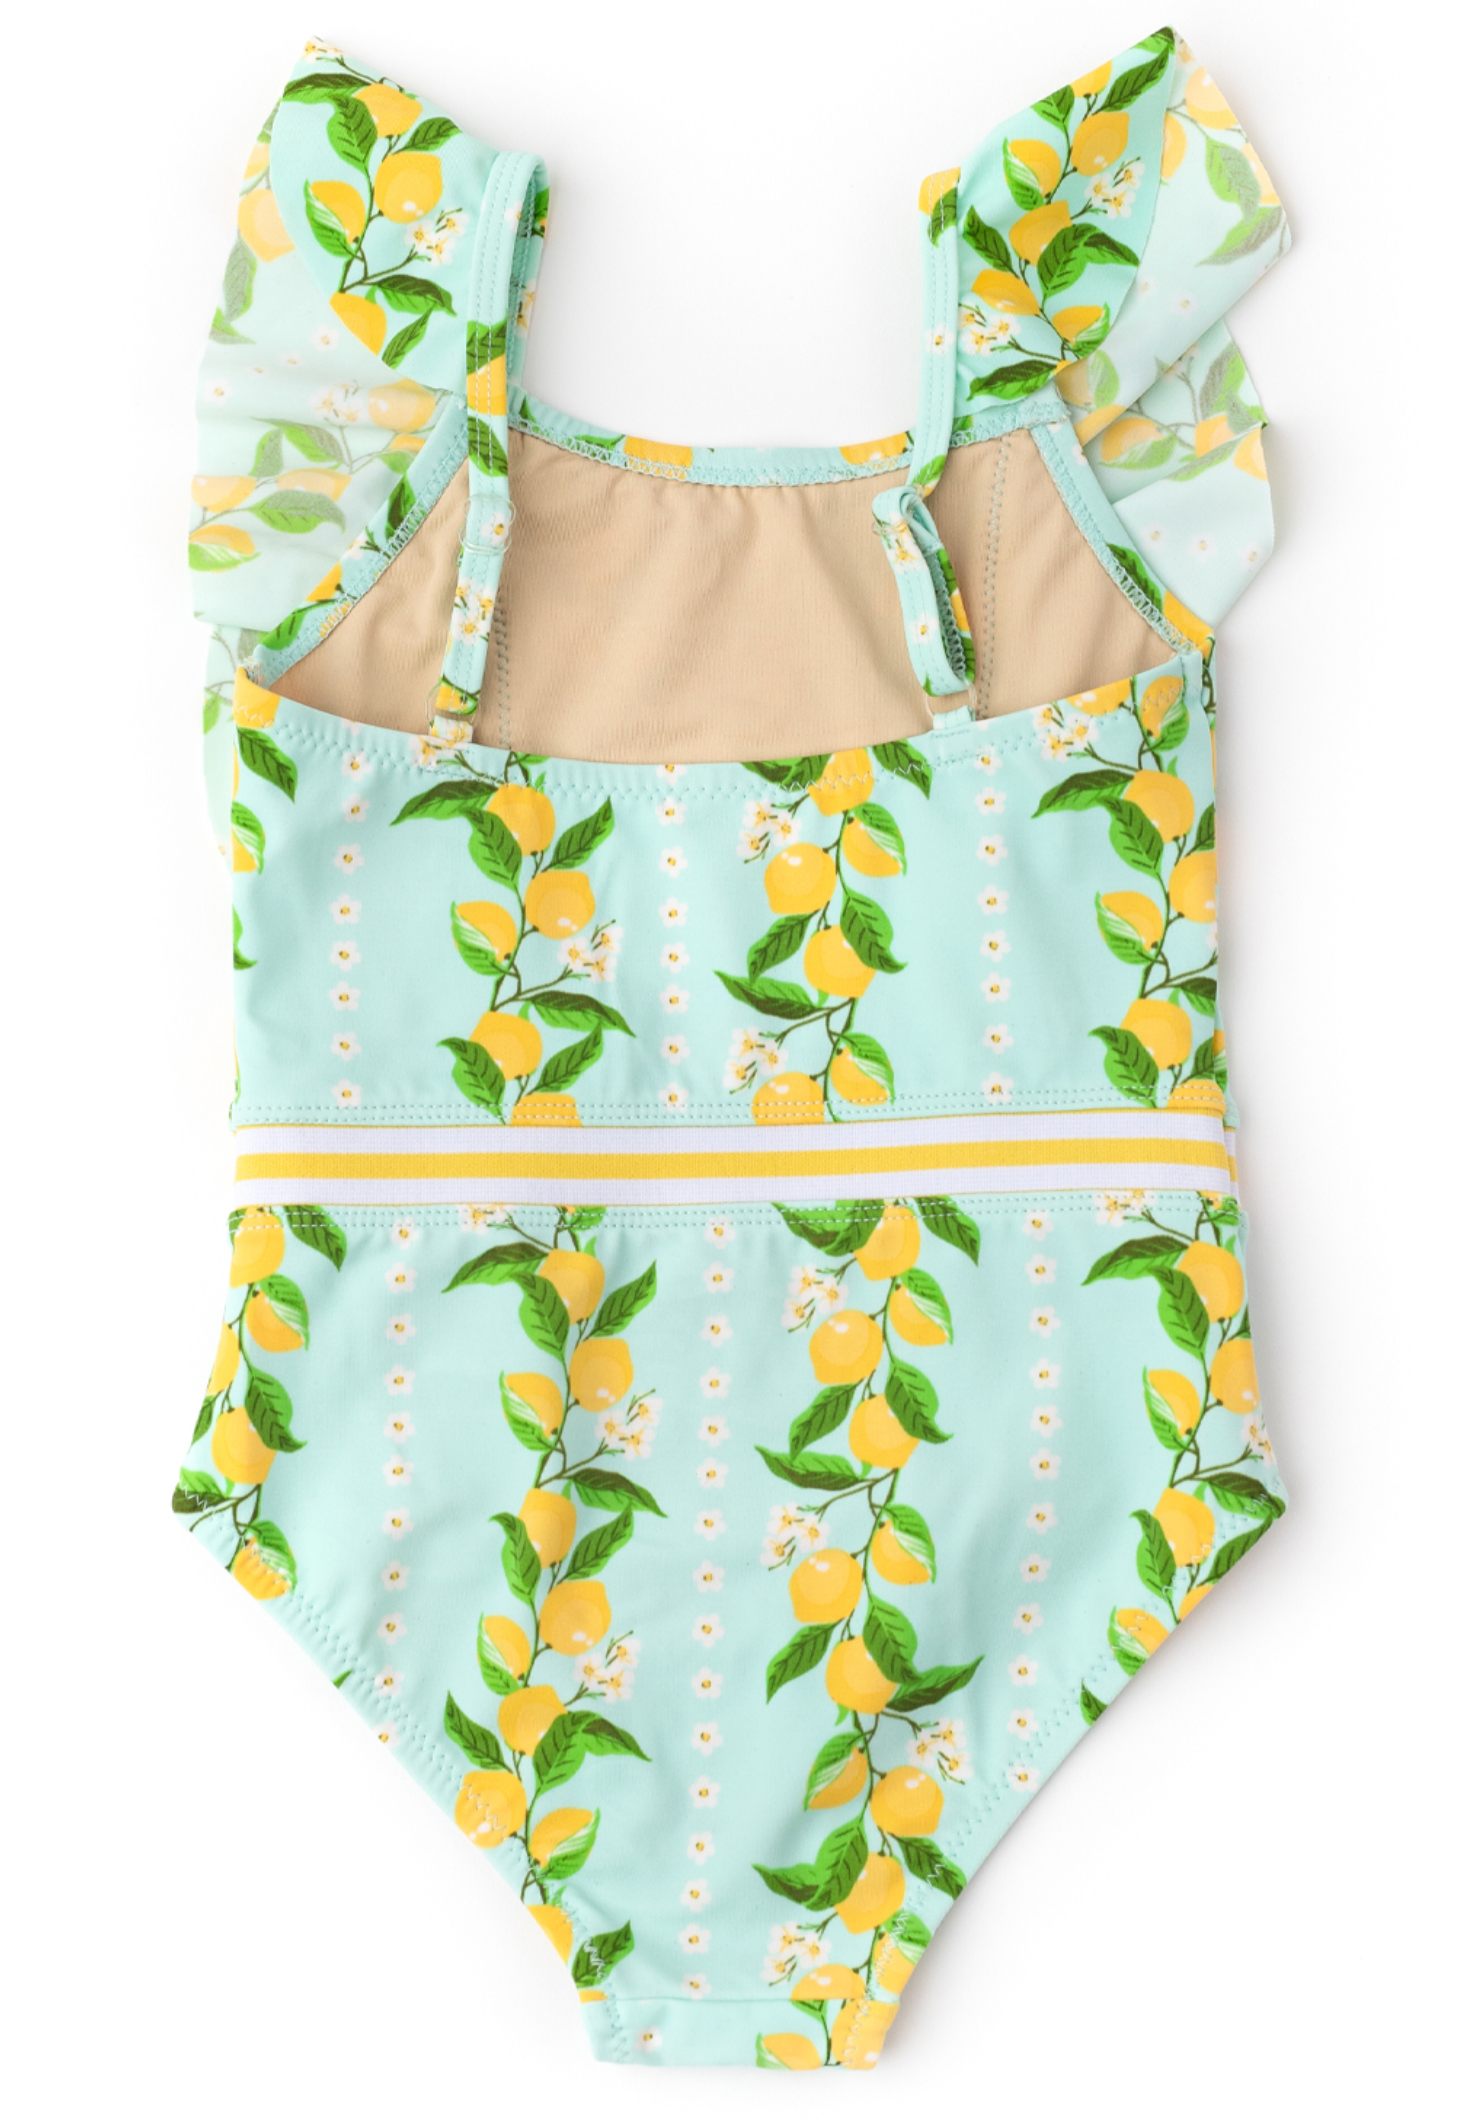 Shade Critters - Ruffle Shoulder One Piece Swimsuit - Citrus Grove